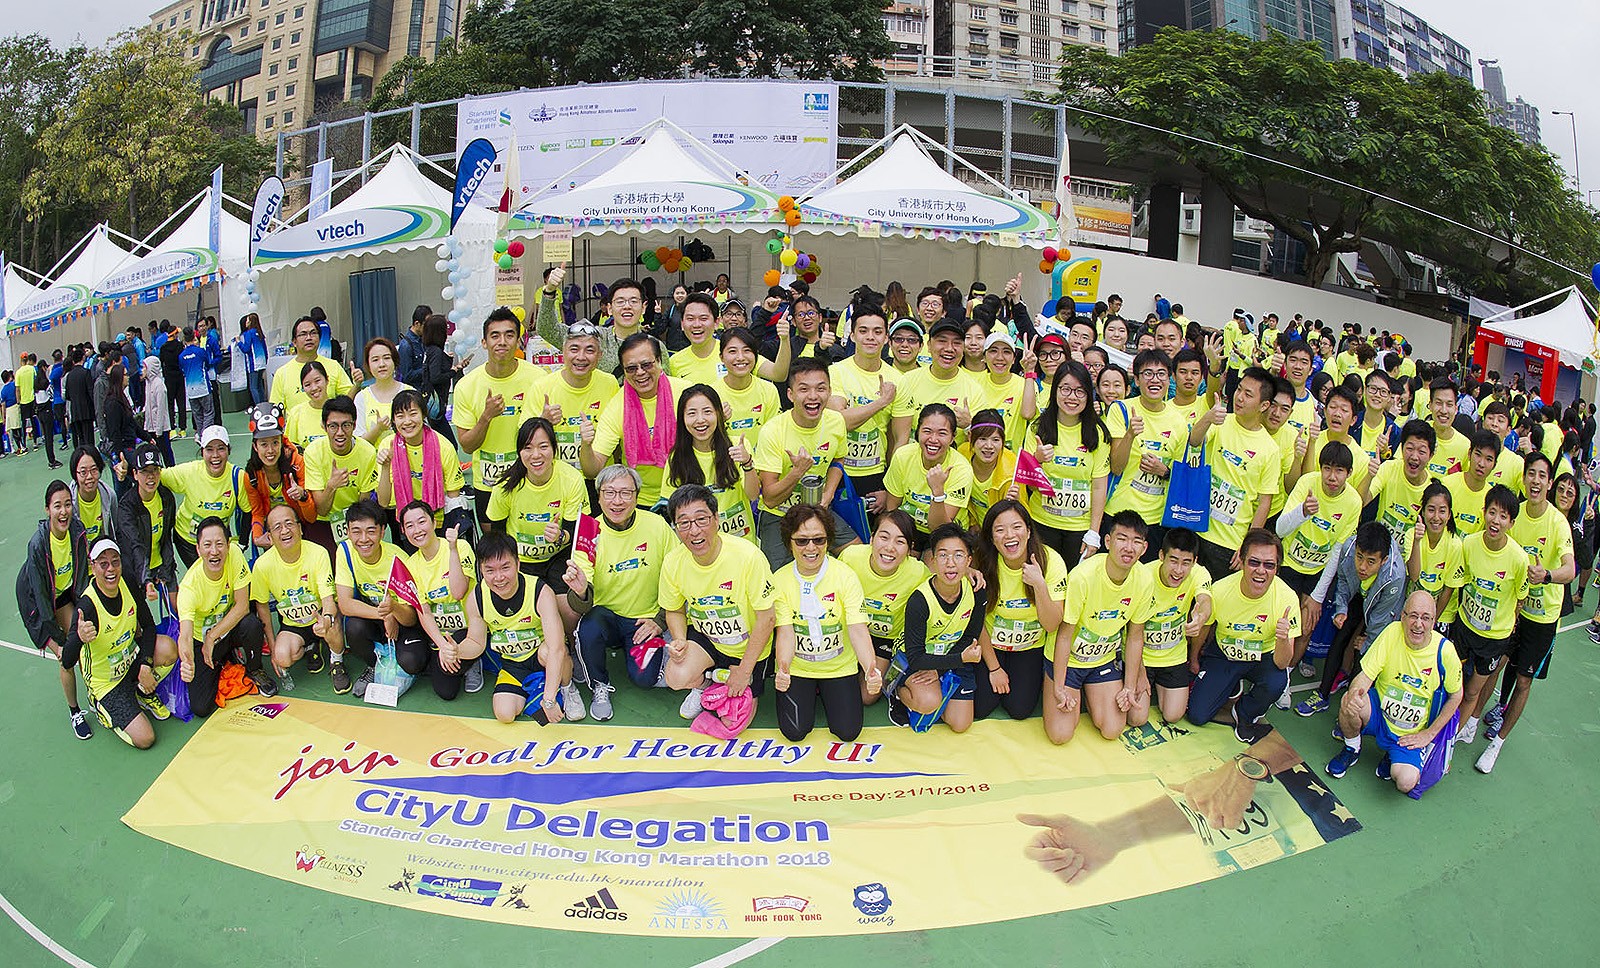 CityU earned 4th place in the race’s “Most Supportive Group Award”.